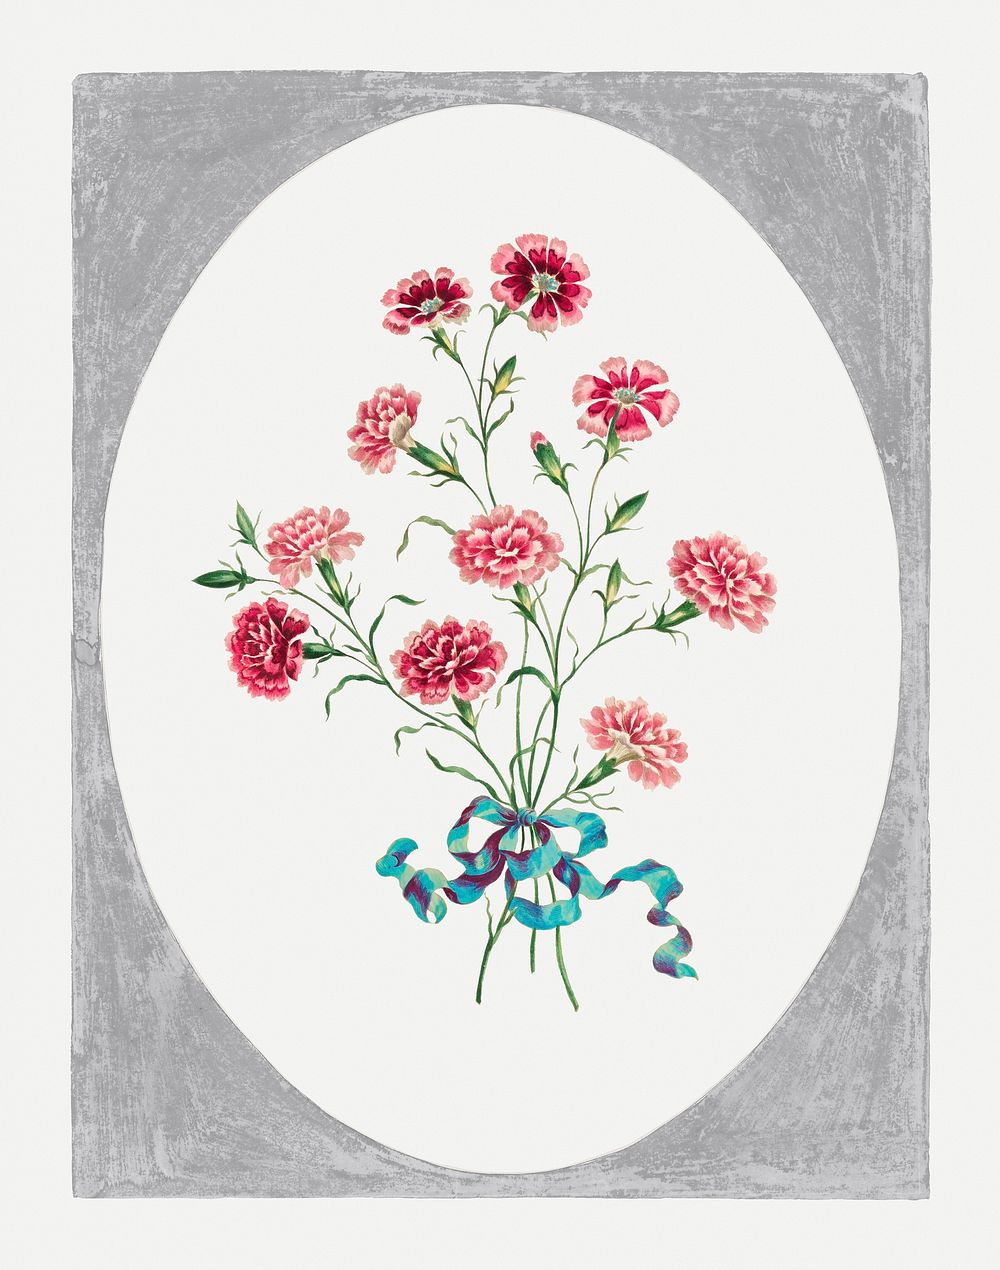 India pinks psd vintage floral art print, remixed from artworks by John Edwards